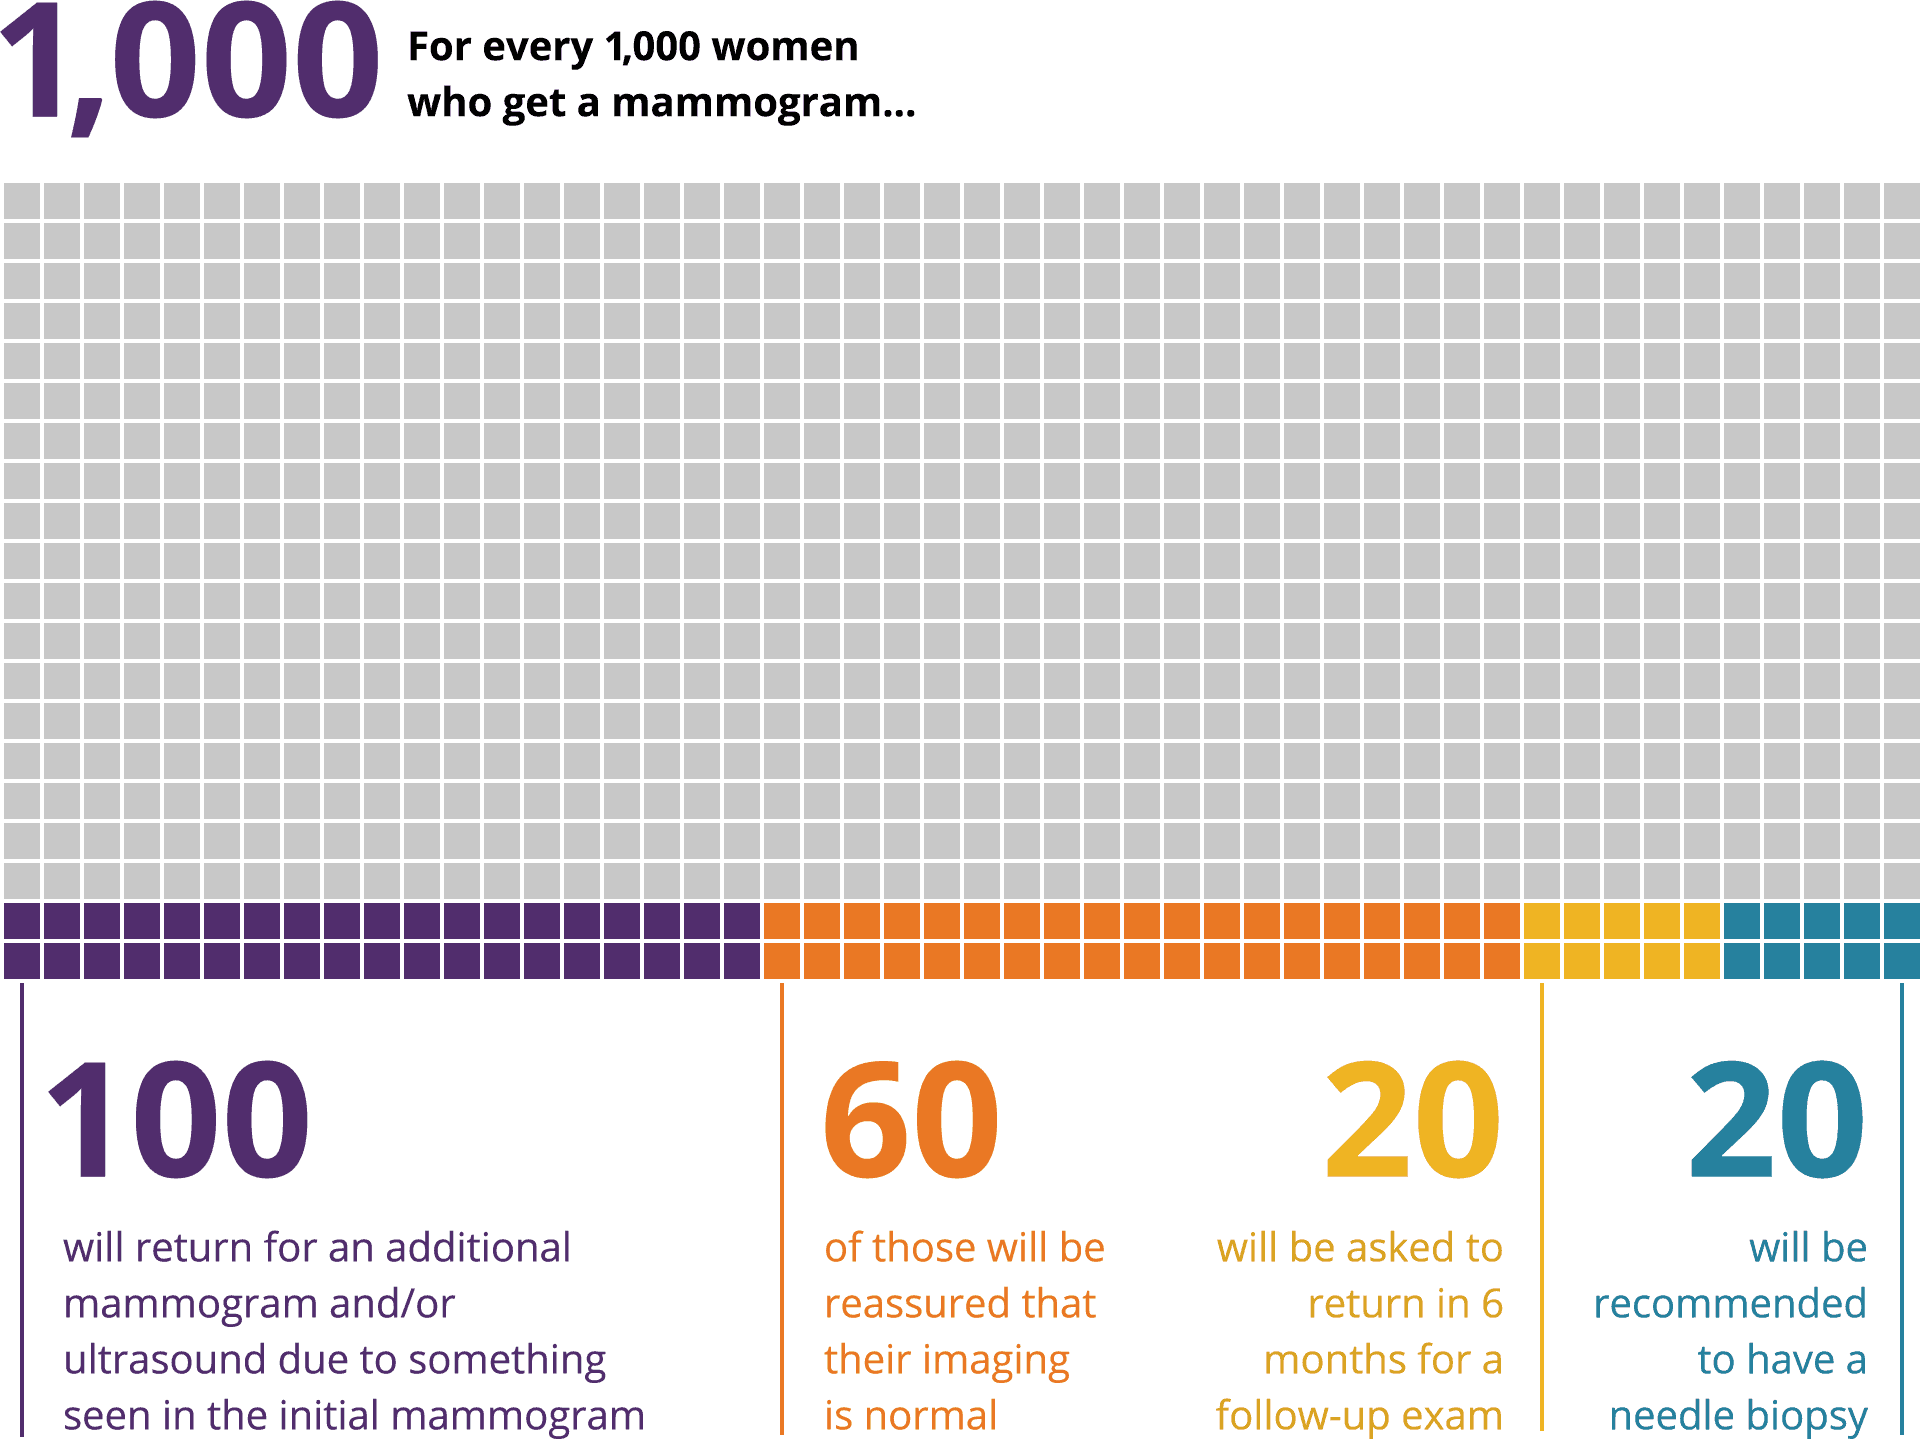 Infographic showing for every 1,000 women who get a mammogram, 100 will return for an additional mammogram and/or ultrasound due to something seen in the initial mammogram, 60 of those will be reassured that their imaging is normal, 20 will be asked to return in 6 months for a follow-up exam, 20 will be recommended to have a needle biopsy